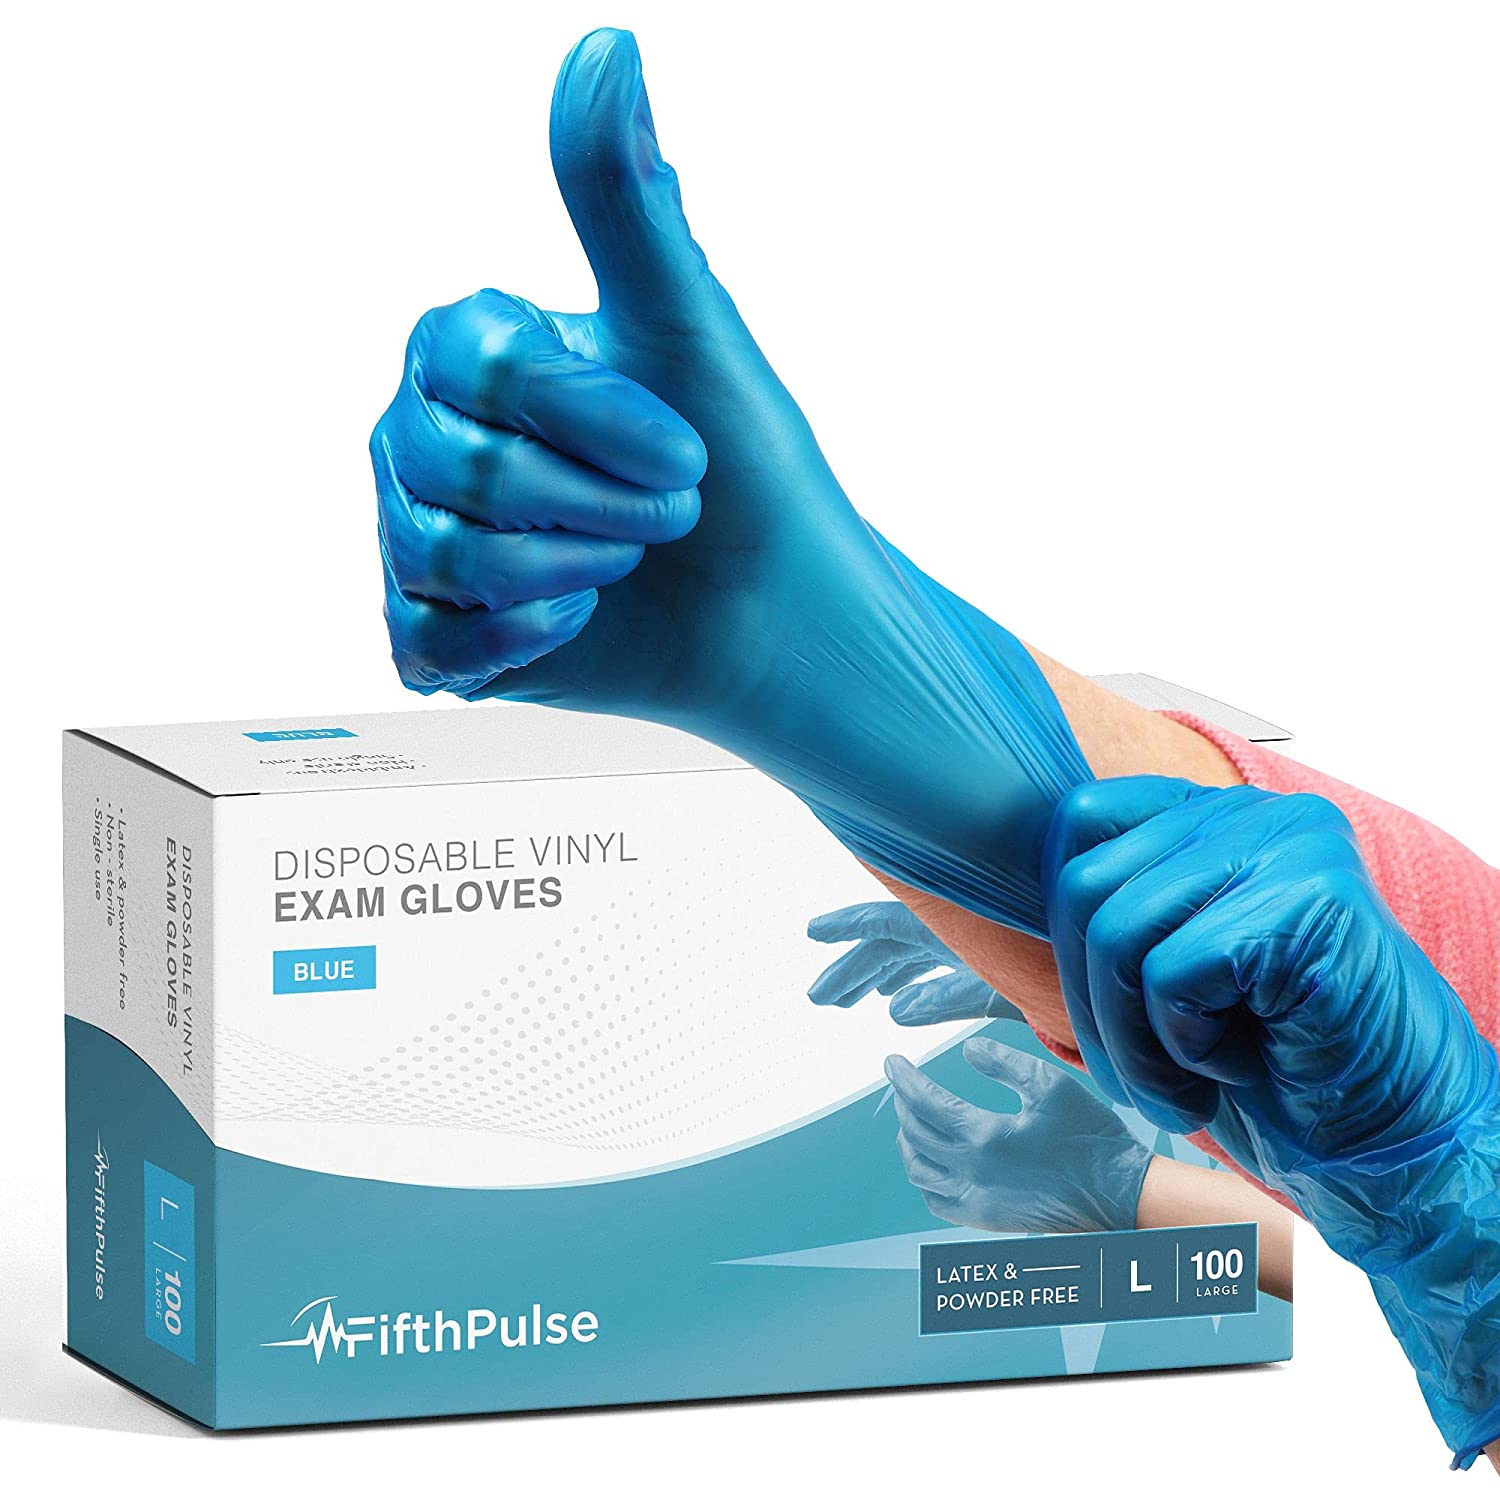 Fifth Pulse Vinyl Gloves, Multifunction Medical Grade Exam, Kitchen Gloves, All-Purpose Industrial Disposable Gloves Latex Free, Powder Free - Blue - Box of 100 Gloves (Large) - image 1 of 6